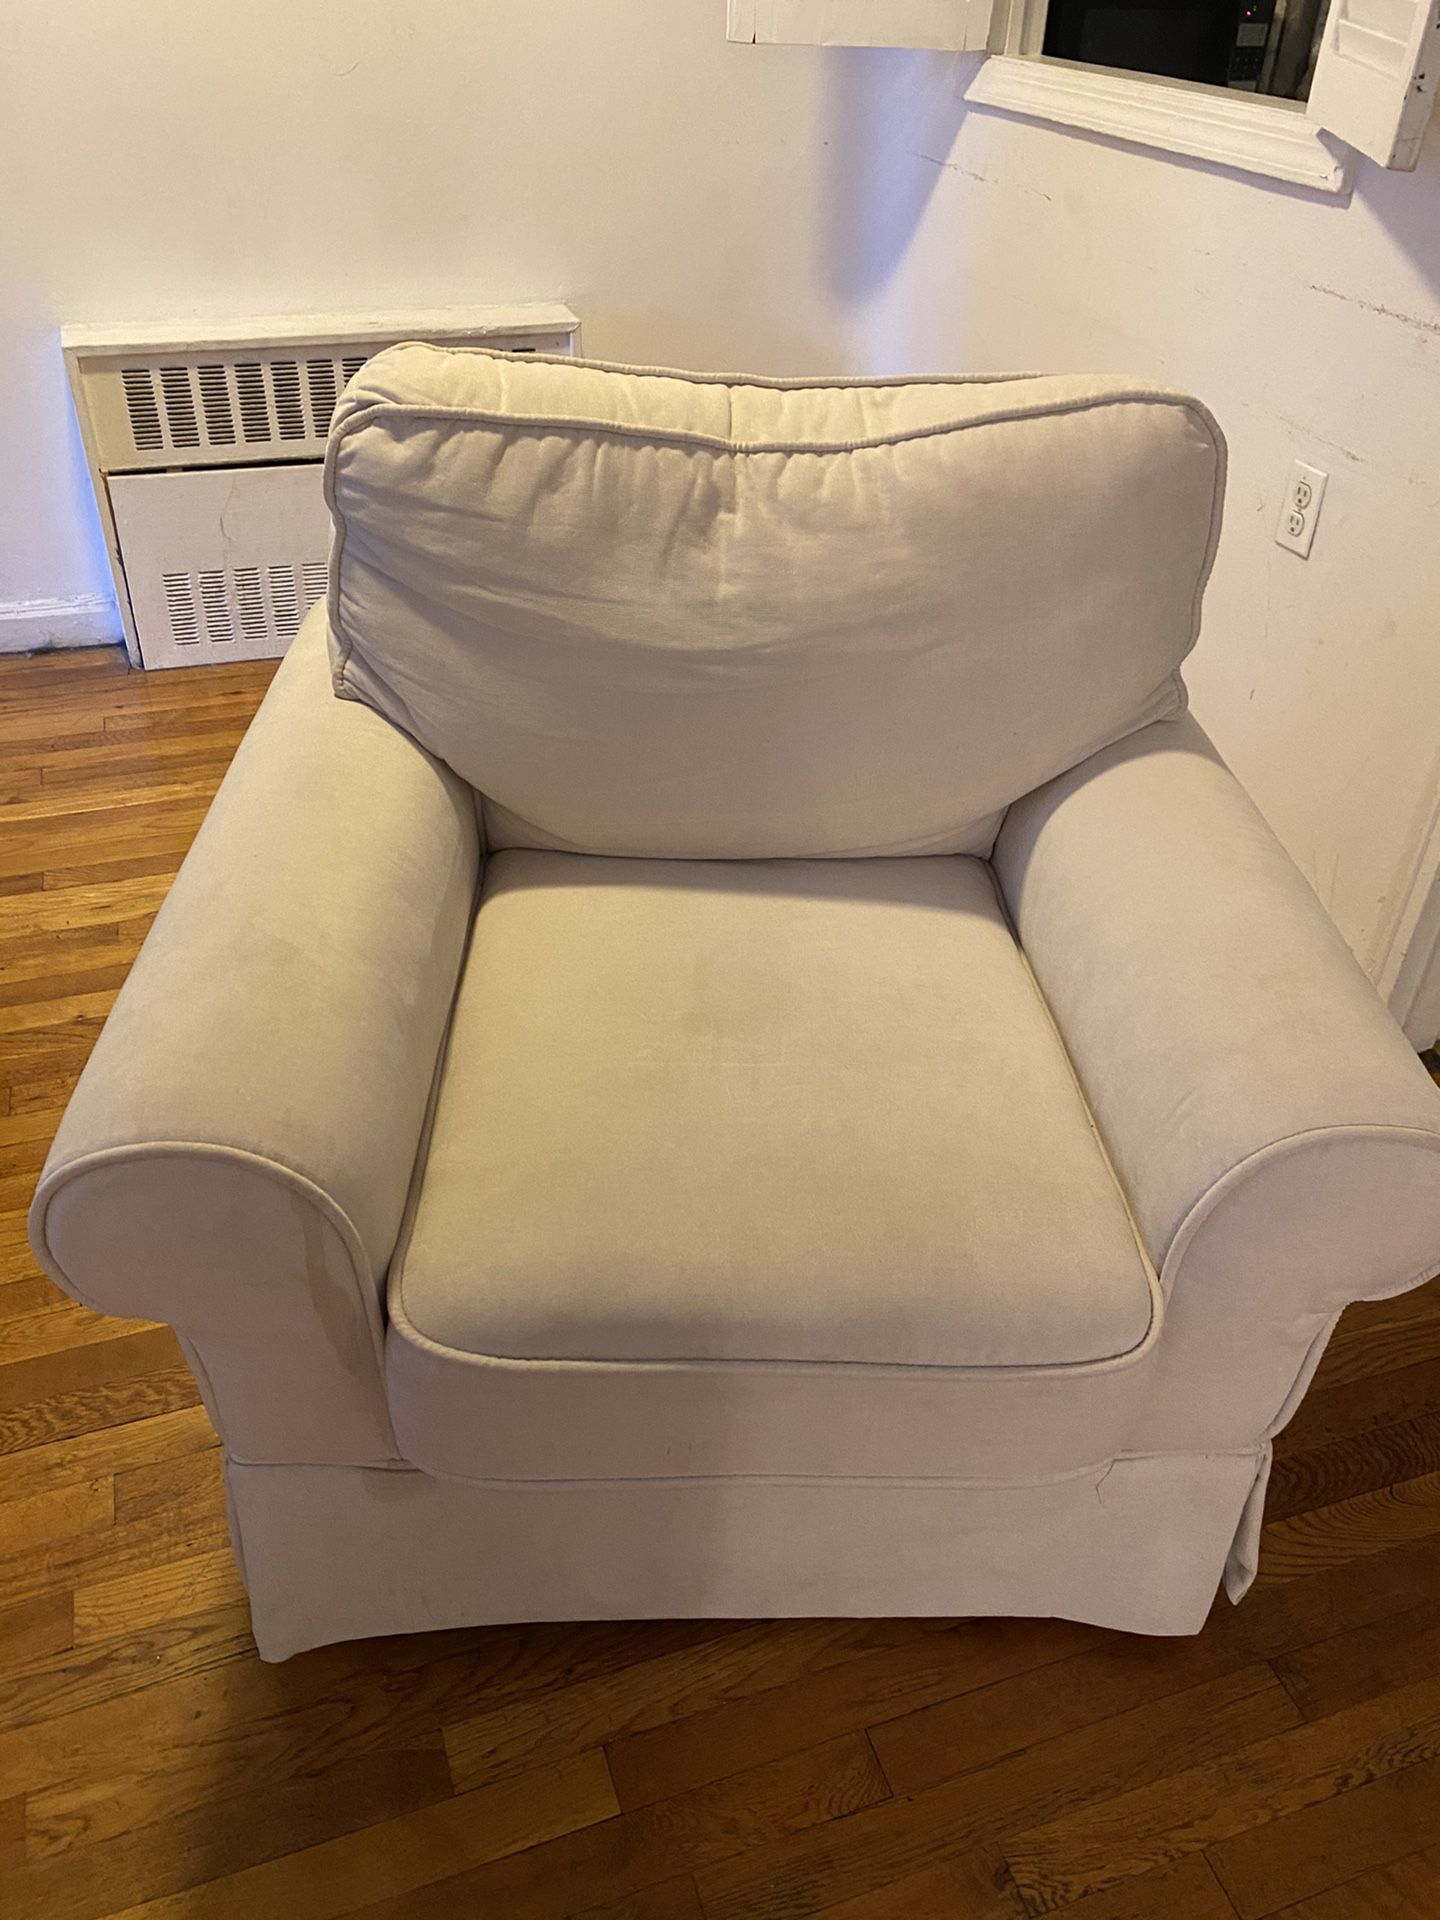 FREE - Lightweight, Large, Very Comfortable Stylish Chair - Used